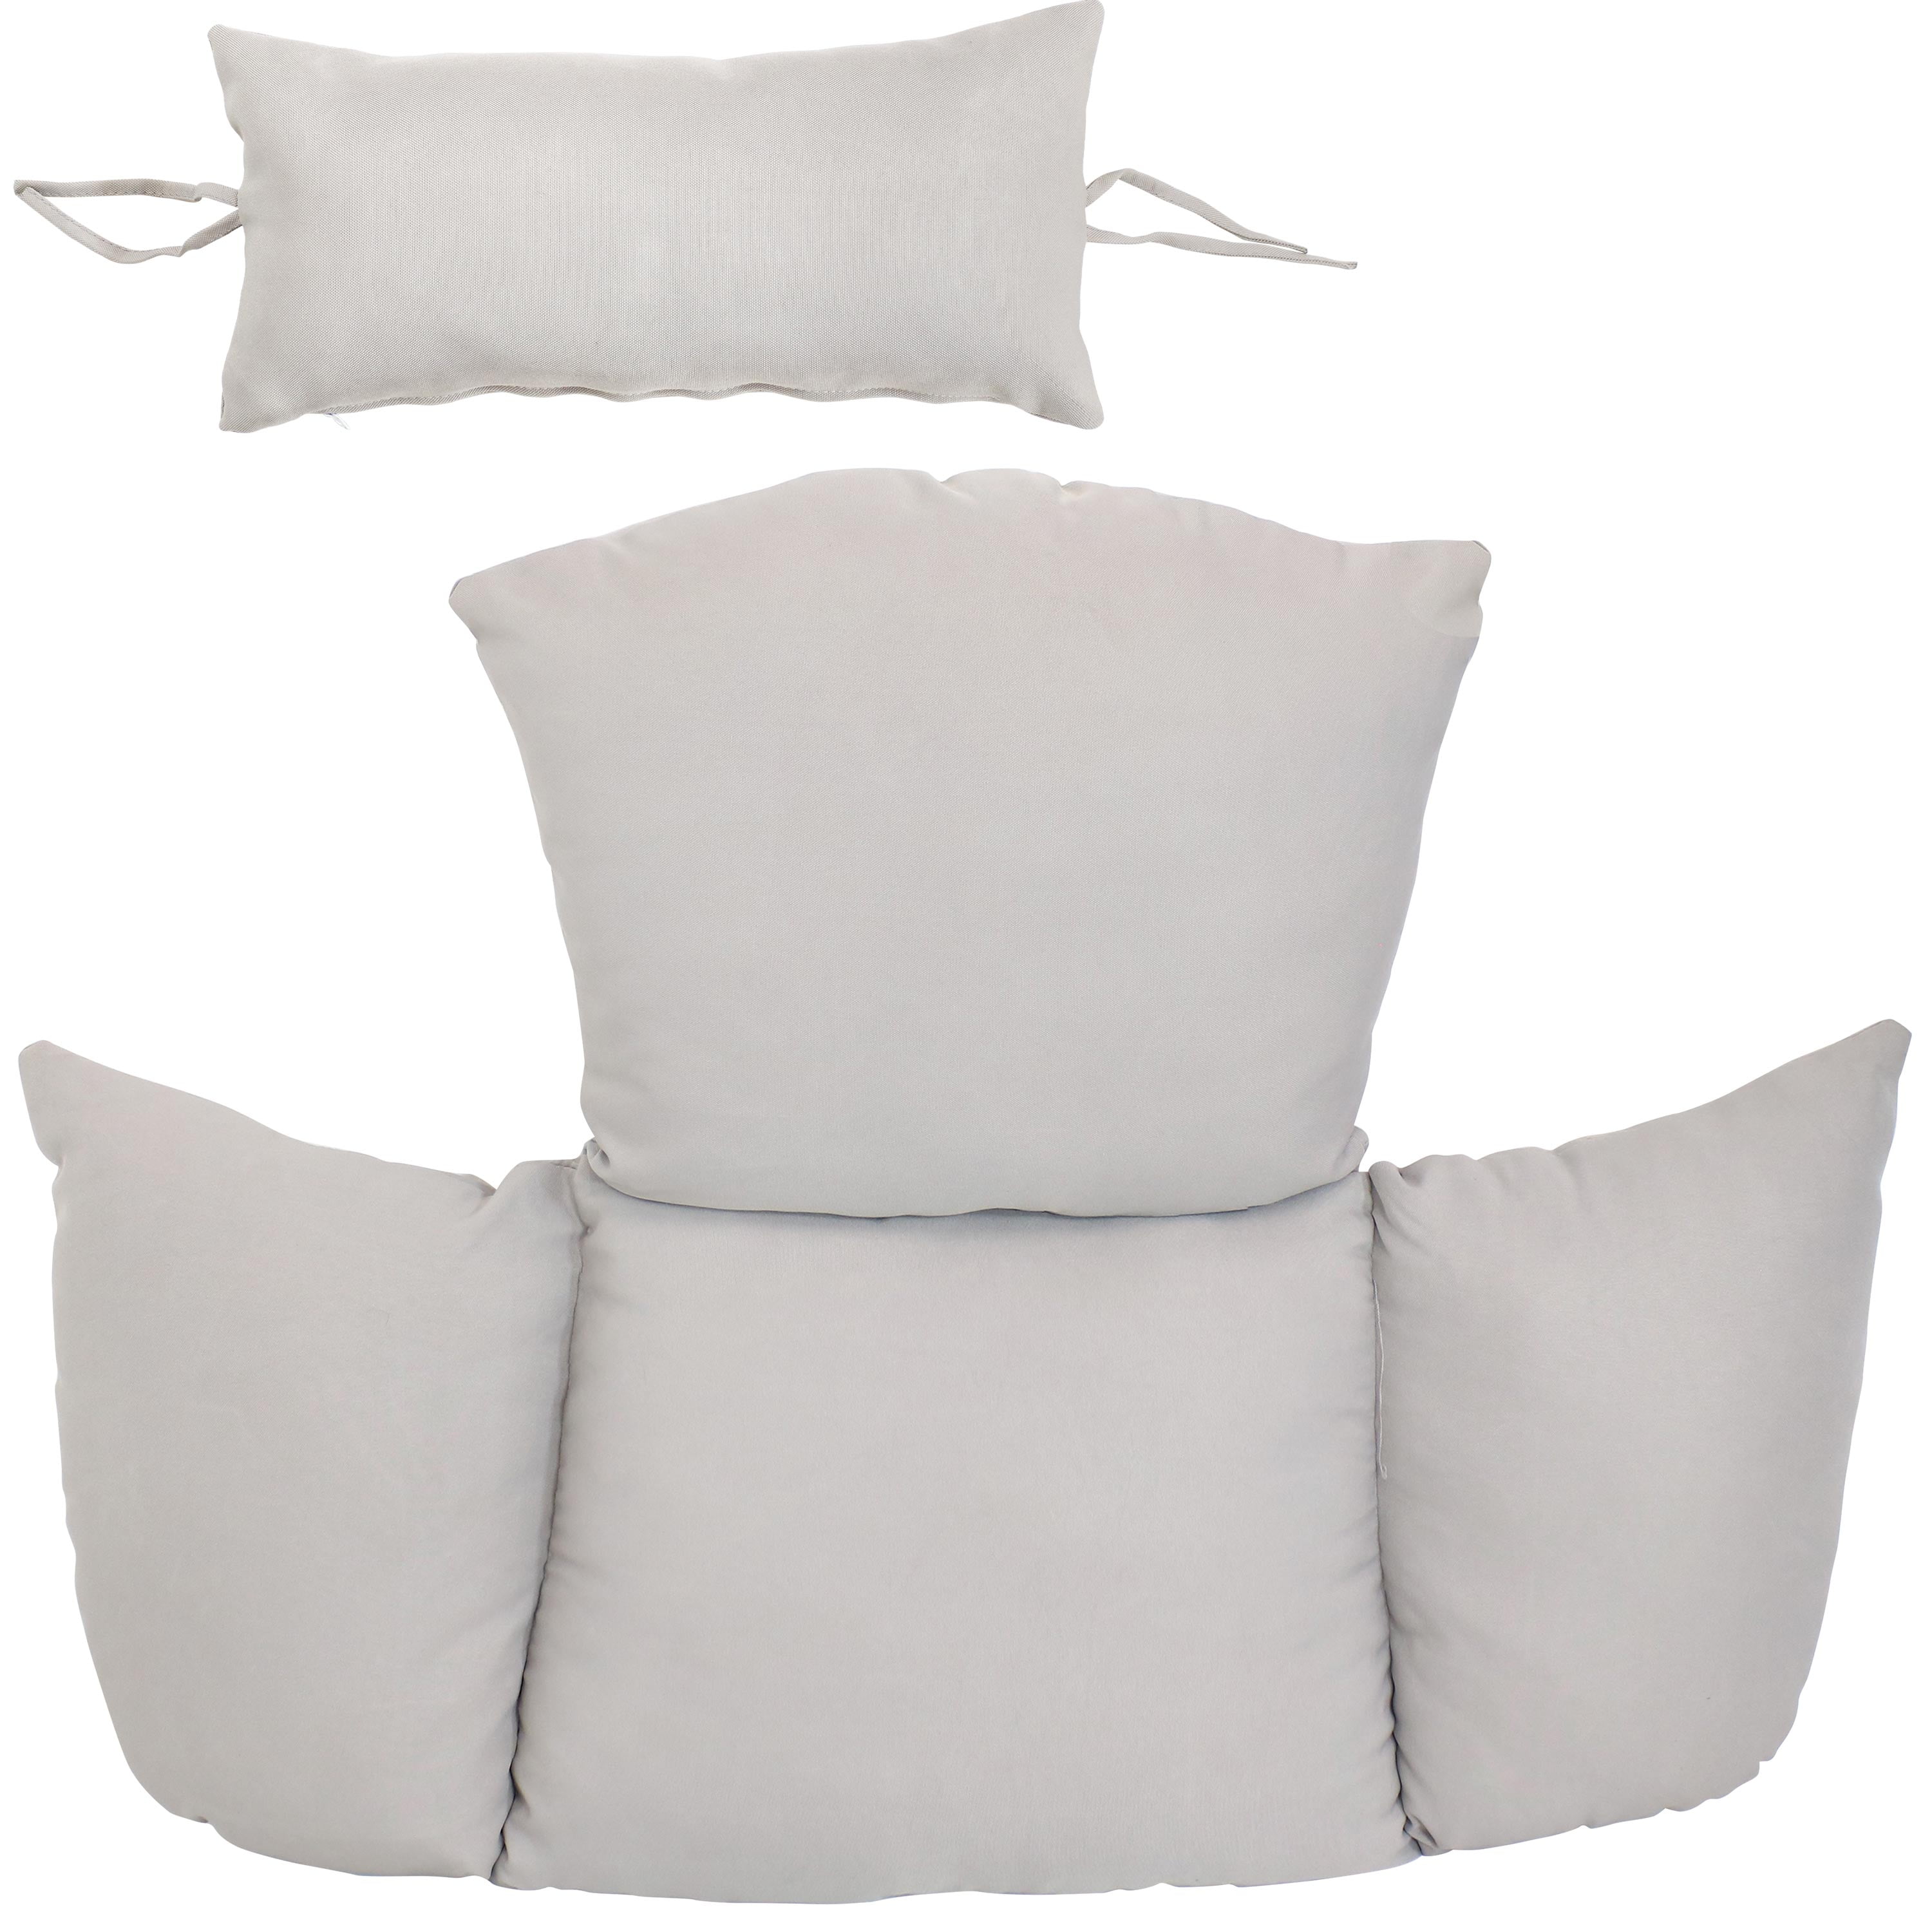 Sunnydaze 2Piece Replacement Cushions for Hanging Egg